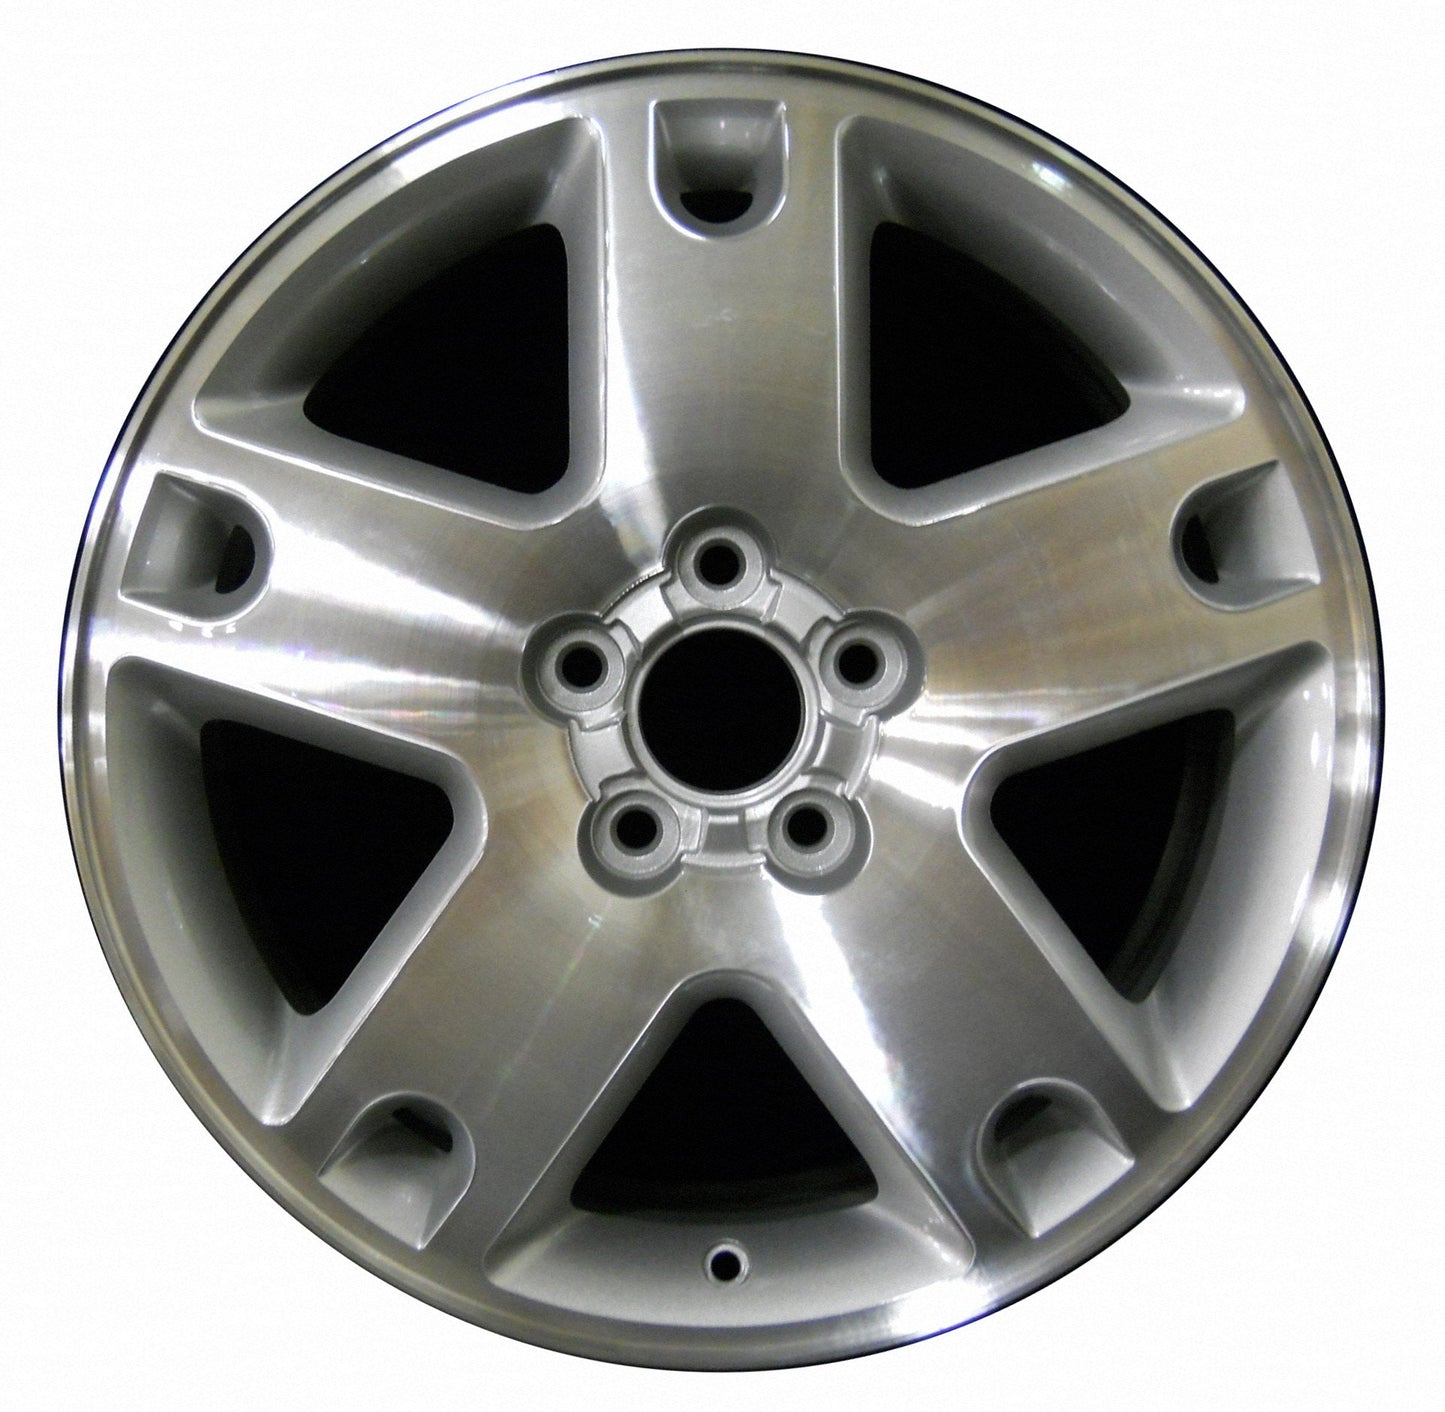 Ford Freestyle  2005, 2006, 2007 Factory OEM Car Wheel Size 18x7 Alloy WAO.3573.PS09.MA